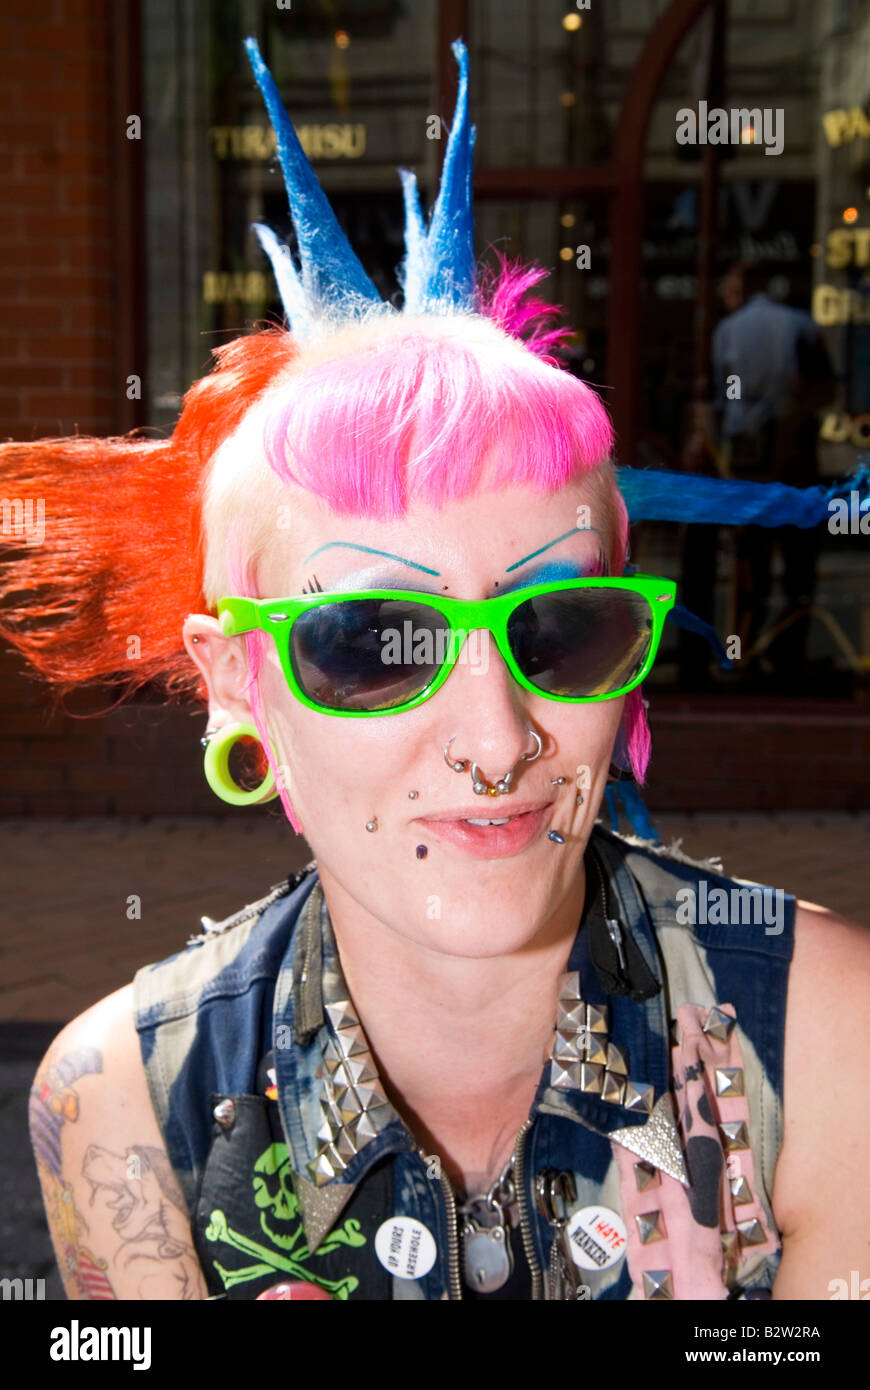 Blackpool Rebellion Festival Punk fashion The clothing, hairstyles, body  modifications punk style jackets, denim and leather subculture. These  Styles carried slogans, not logos and are modeled on bands like The  Exploited to